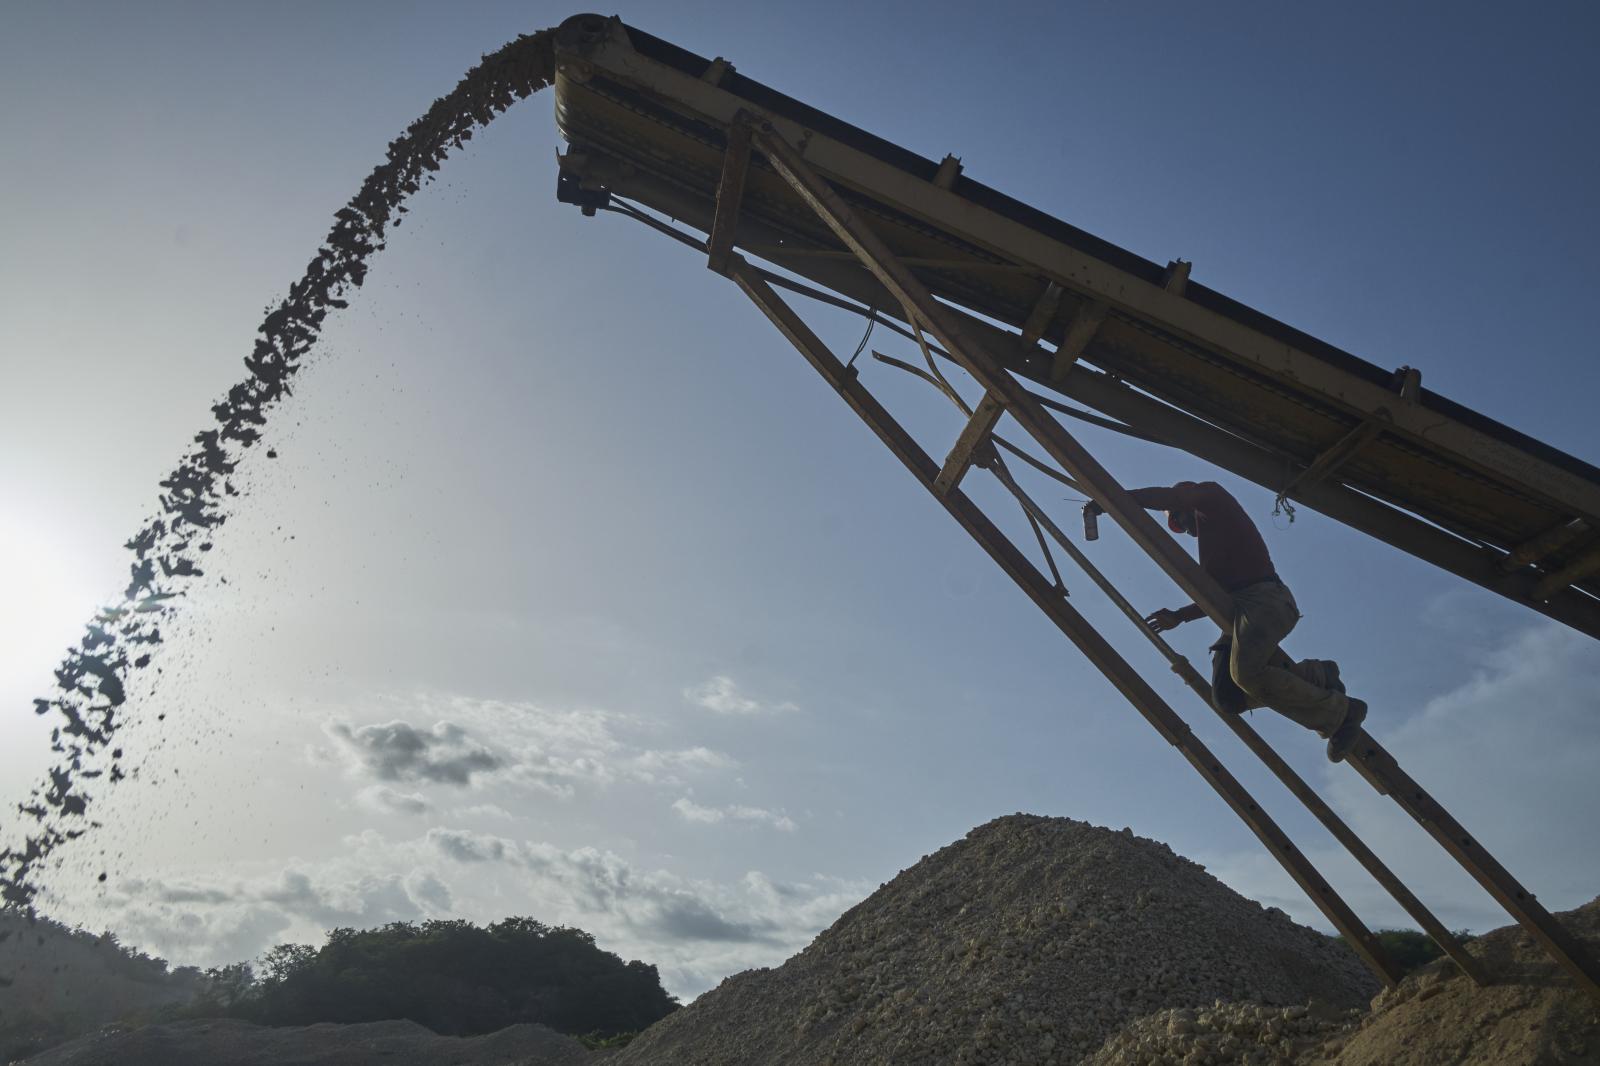 Sand, Diesel, and Sun: a day in a sand quarry in nigua, Dominican Republic